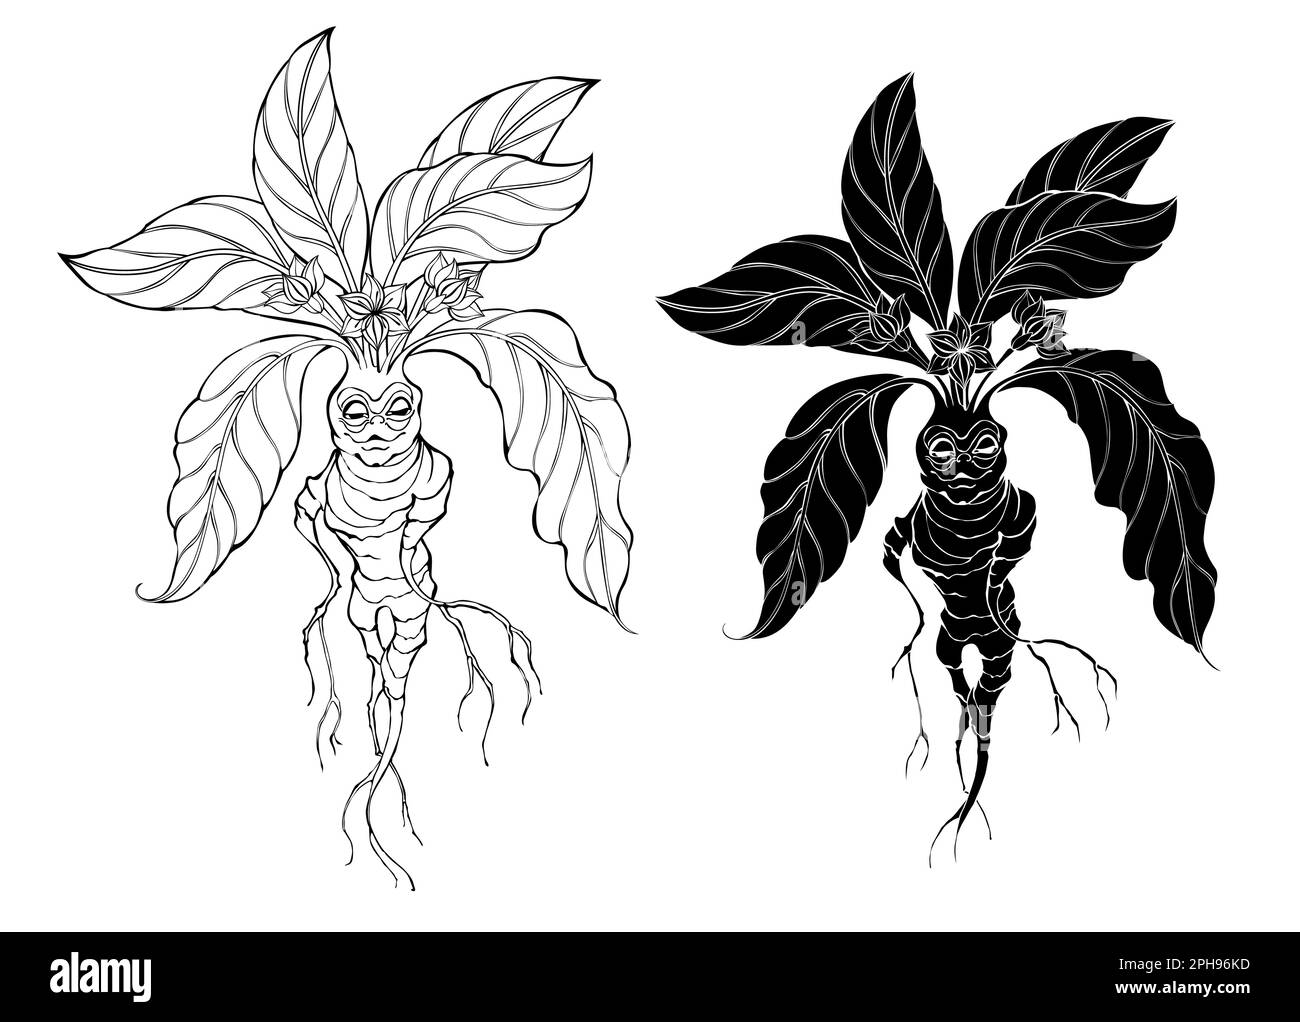 Silhouette and contour, artistically drawn, magic mandrake on white background. Stock Vector